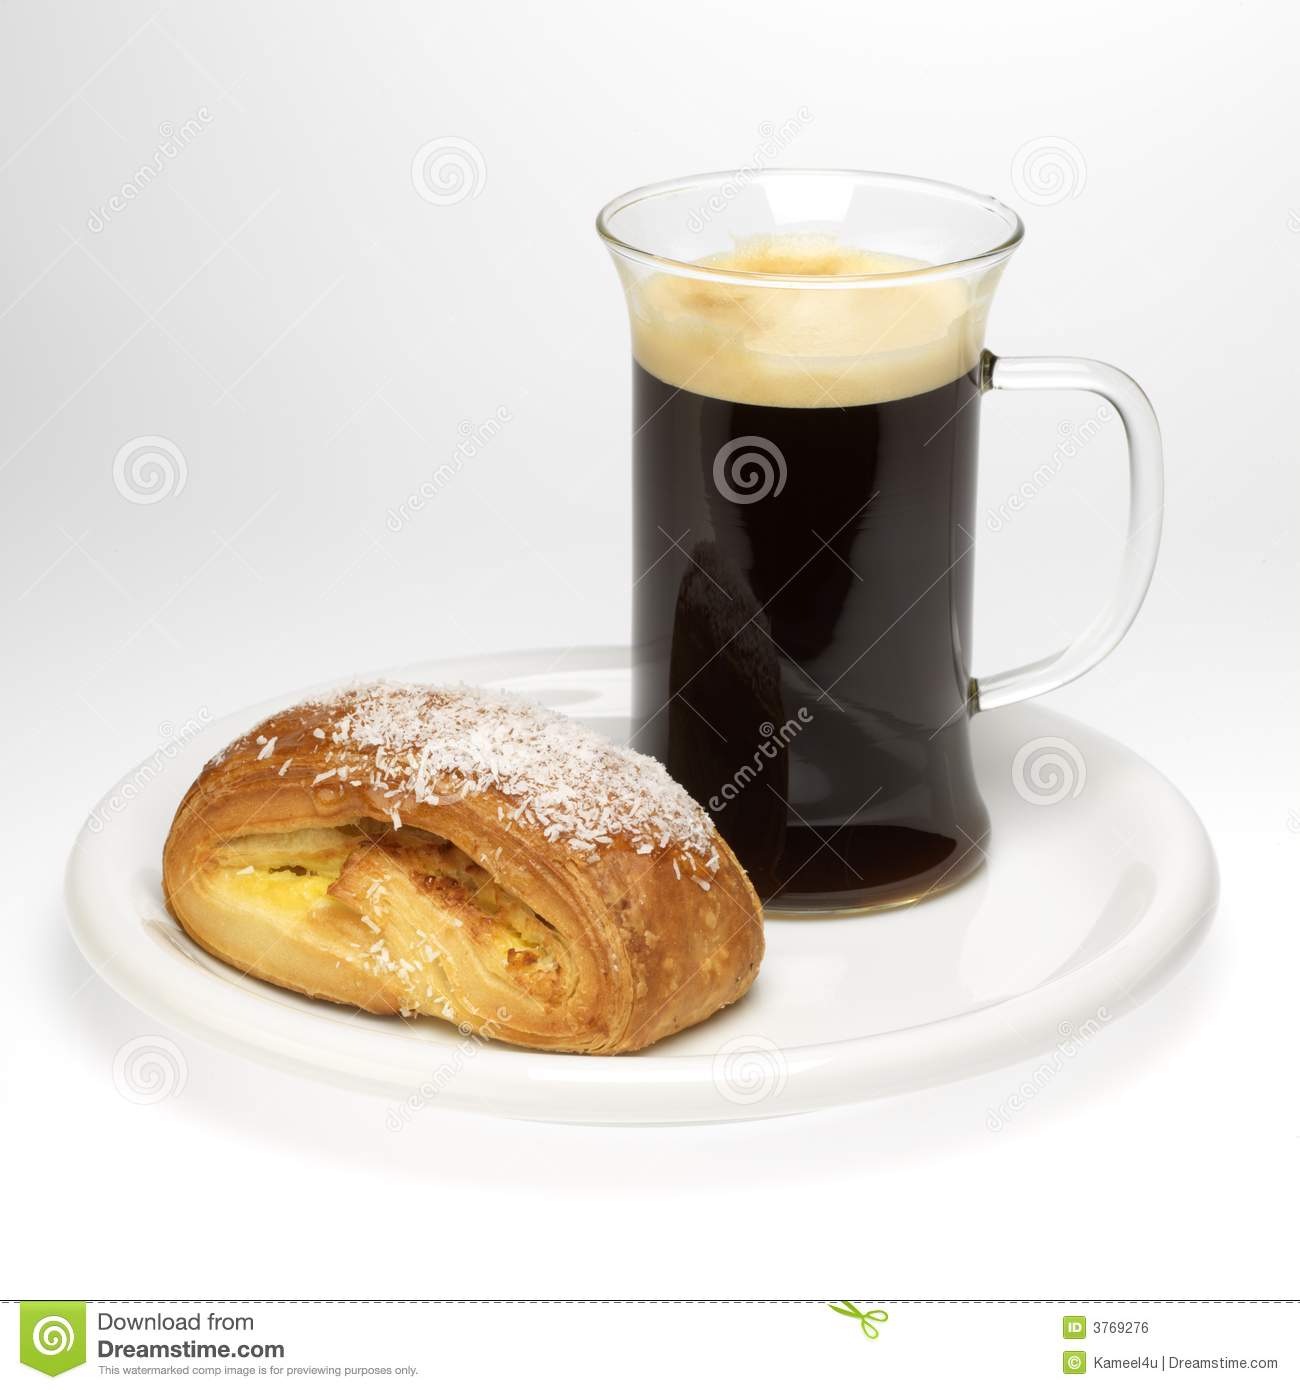 Breakfast   Coffee And Pastry Royalty Free Stock Image   Image    